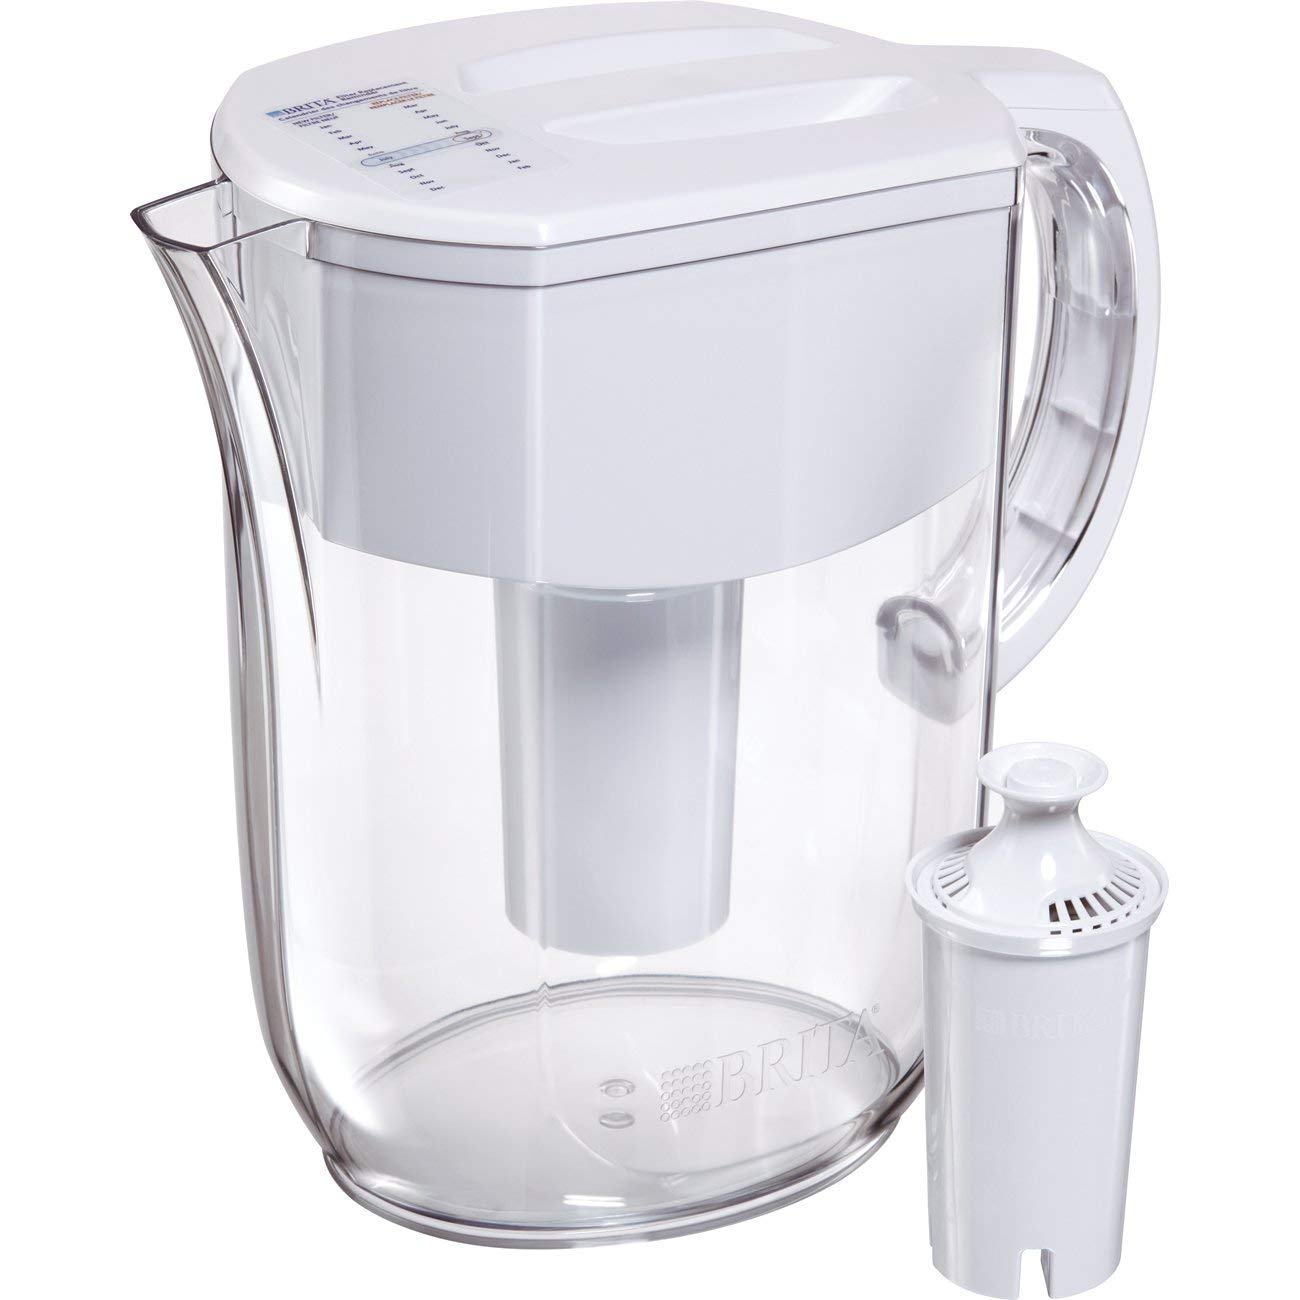 Brita 10 Cup Water Pitcher with Filter